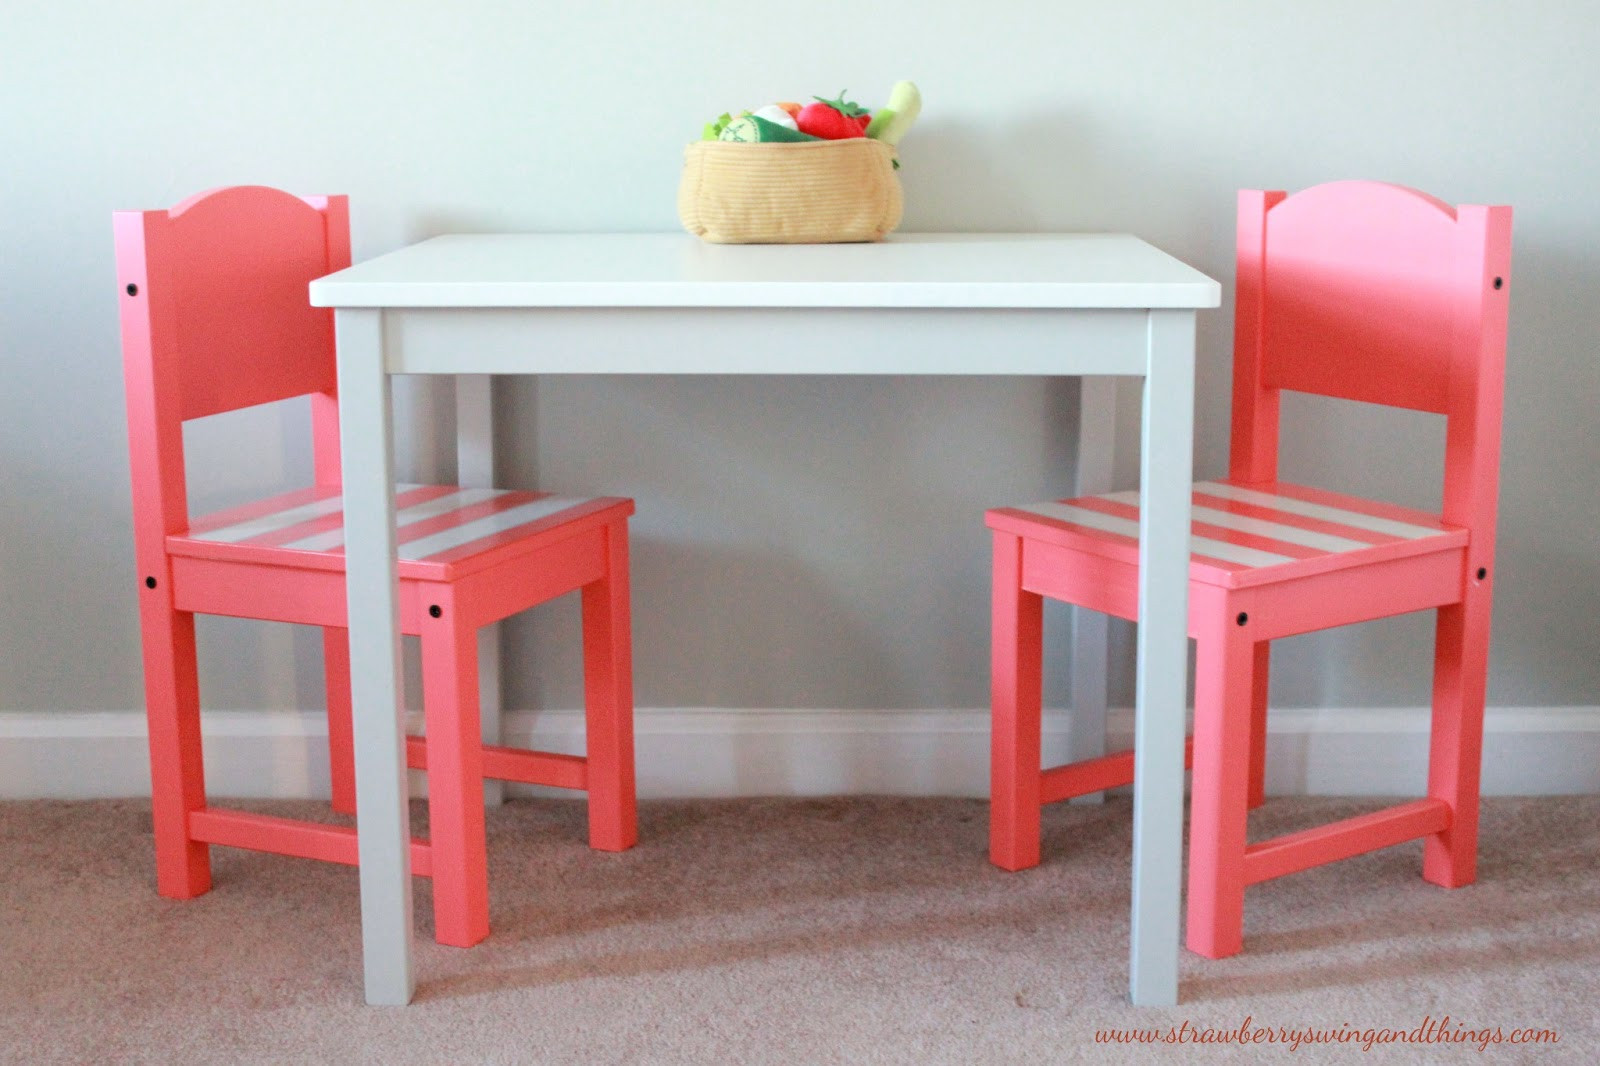 Ikea Kids Table
 Strawberry Swing and other things [Crafty Lady] Children